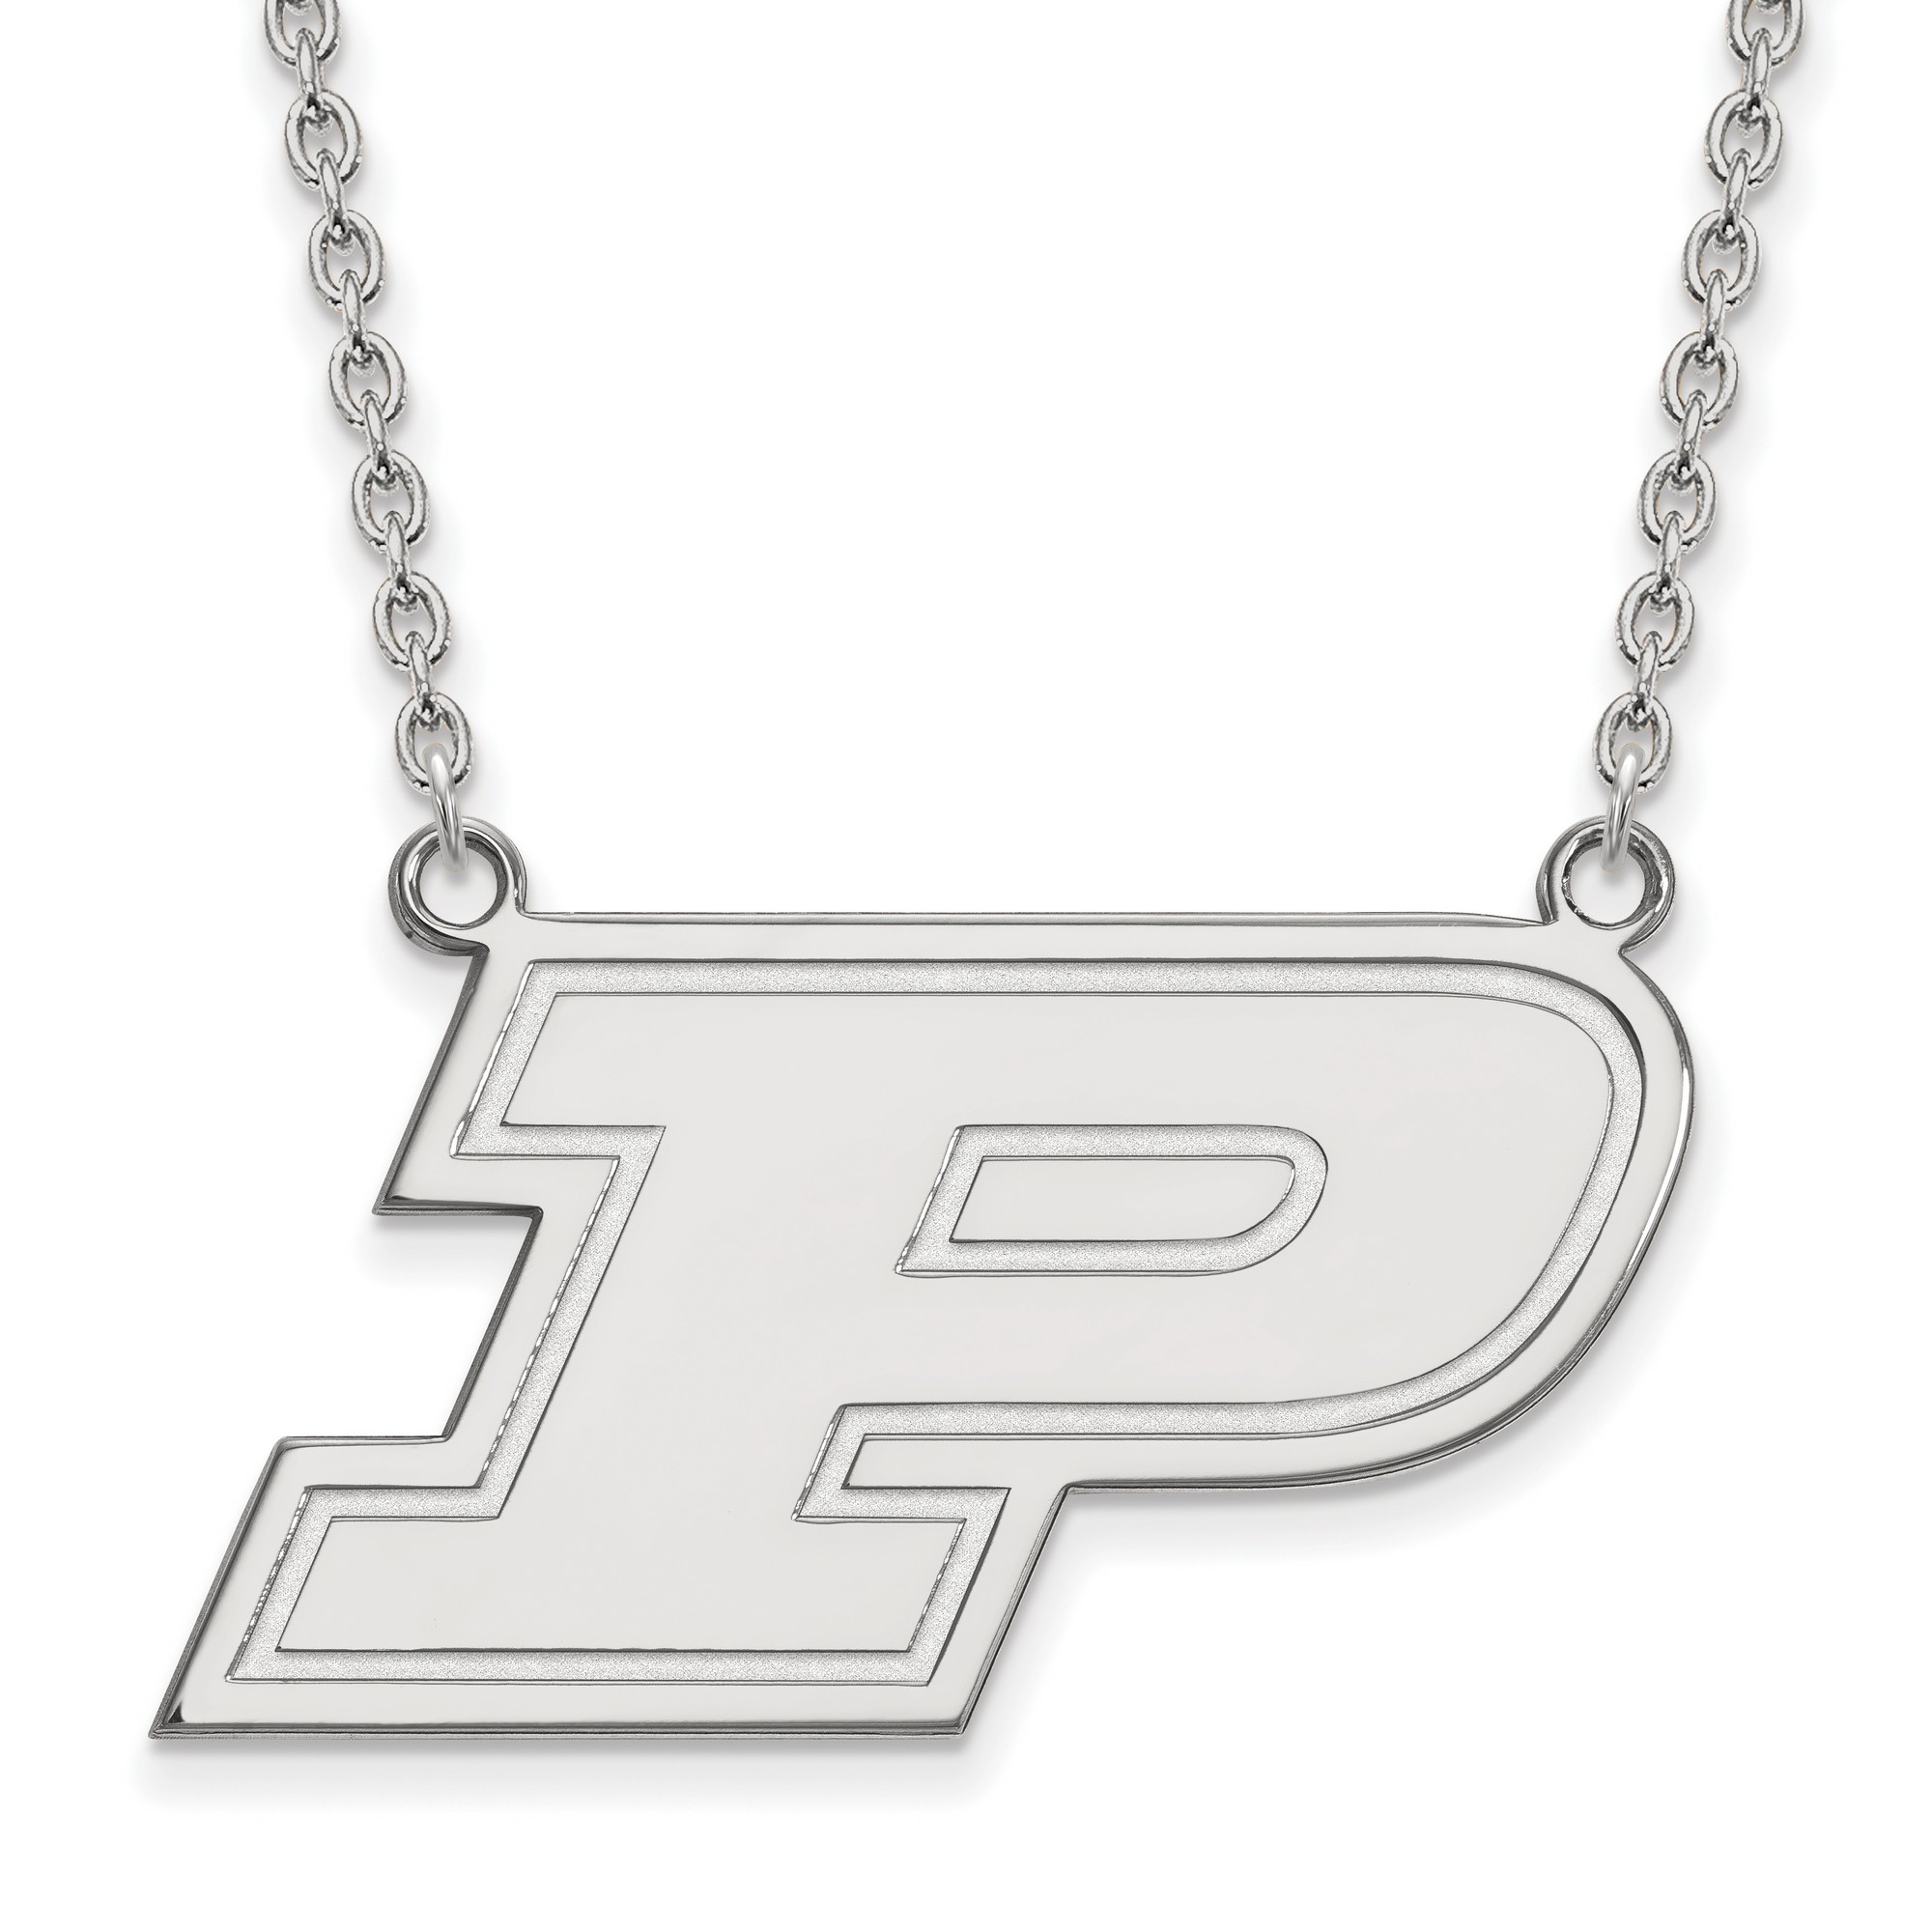 Purdue Boilermakers Motion P Logo Charm Pendant Necklace in Sterling